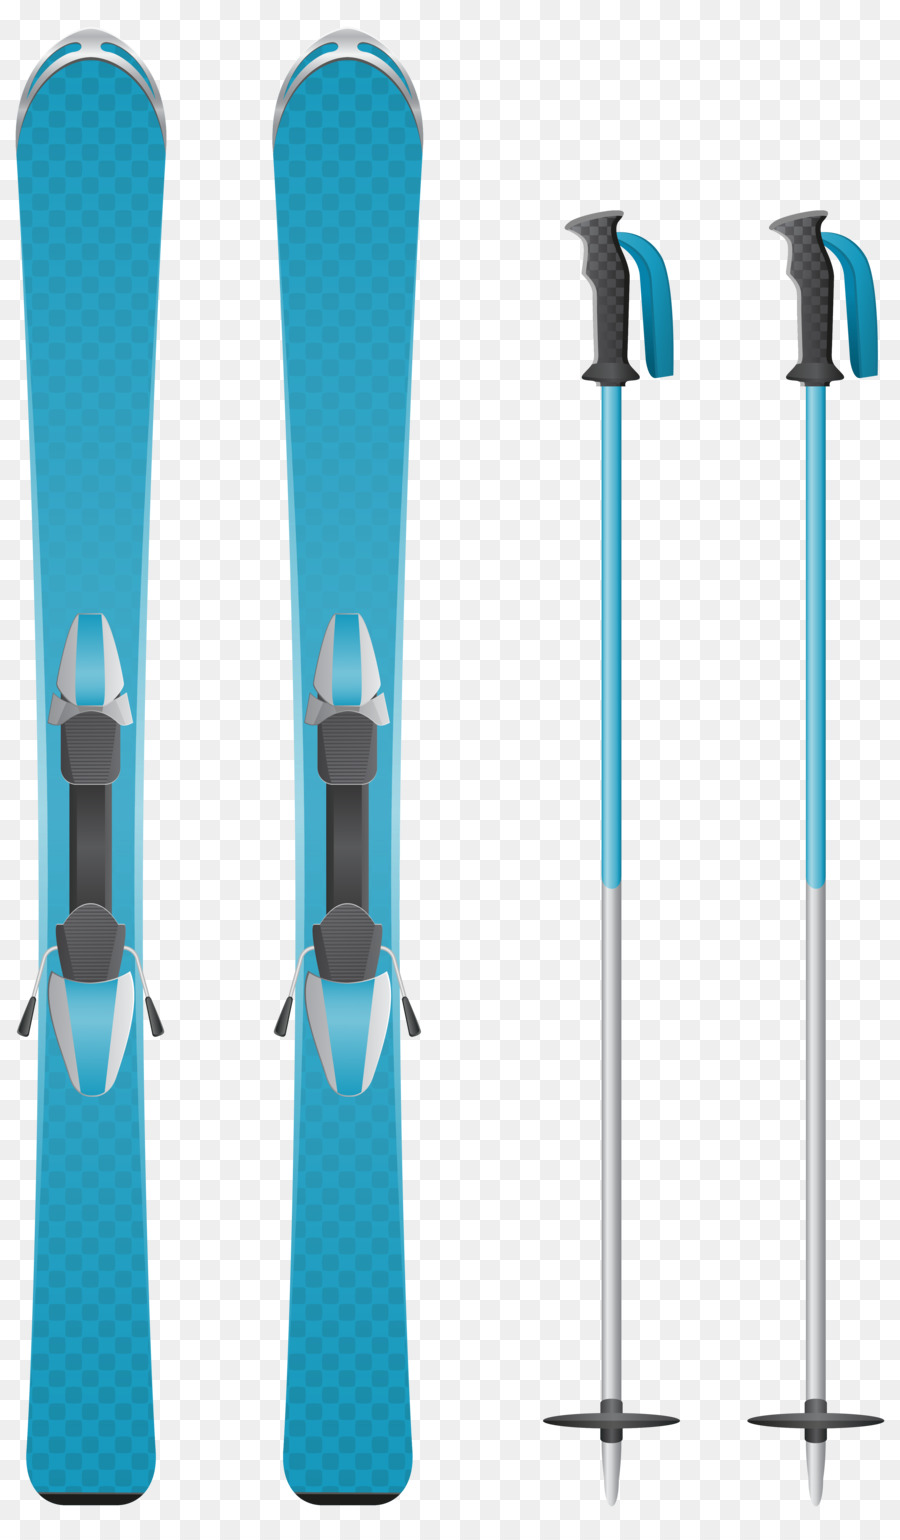 Skis png clipart.